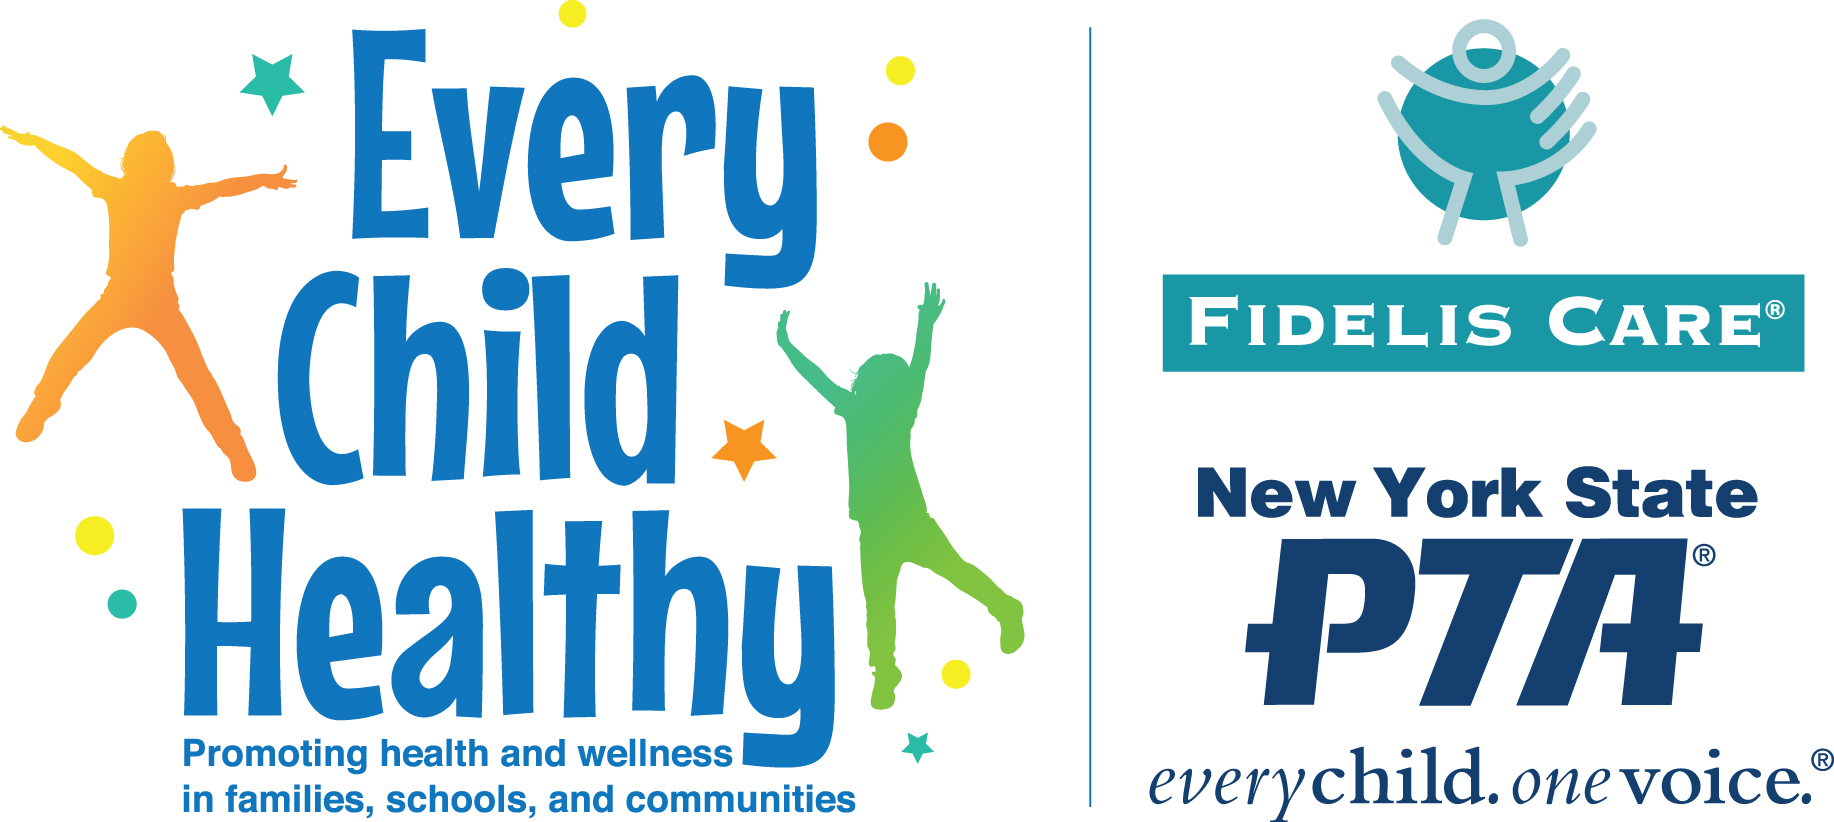 Fidelis Care Every Child Healthy logo